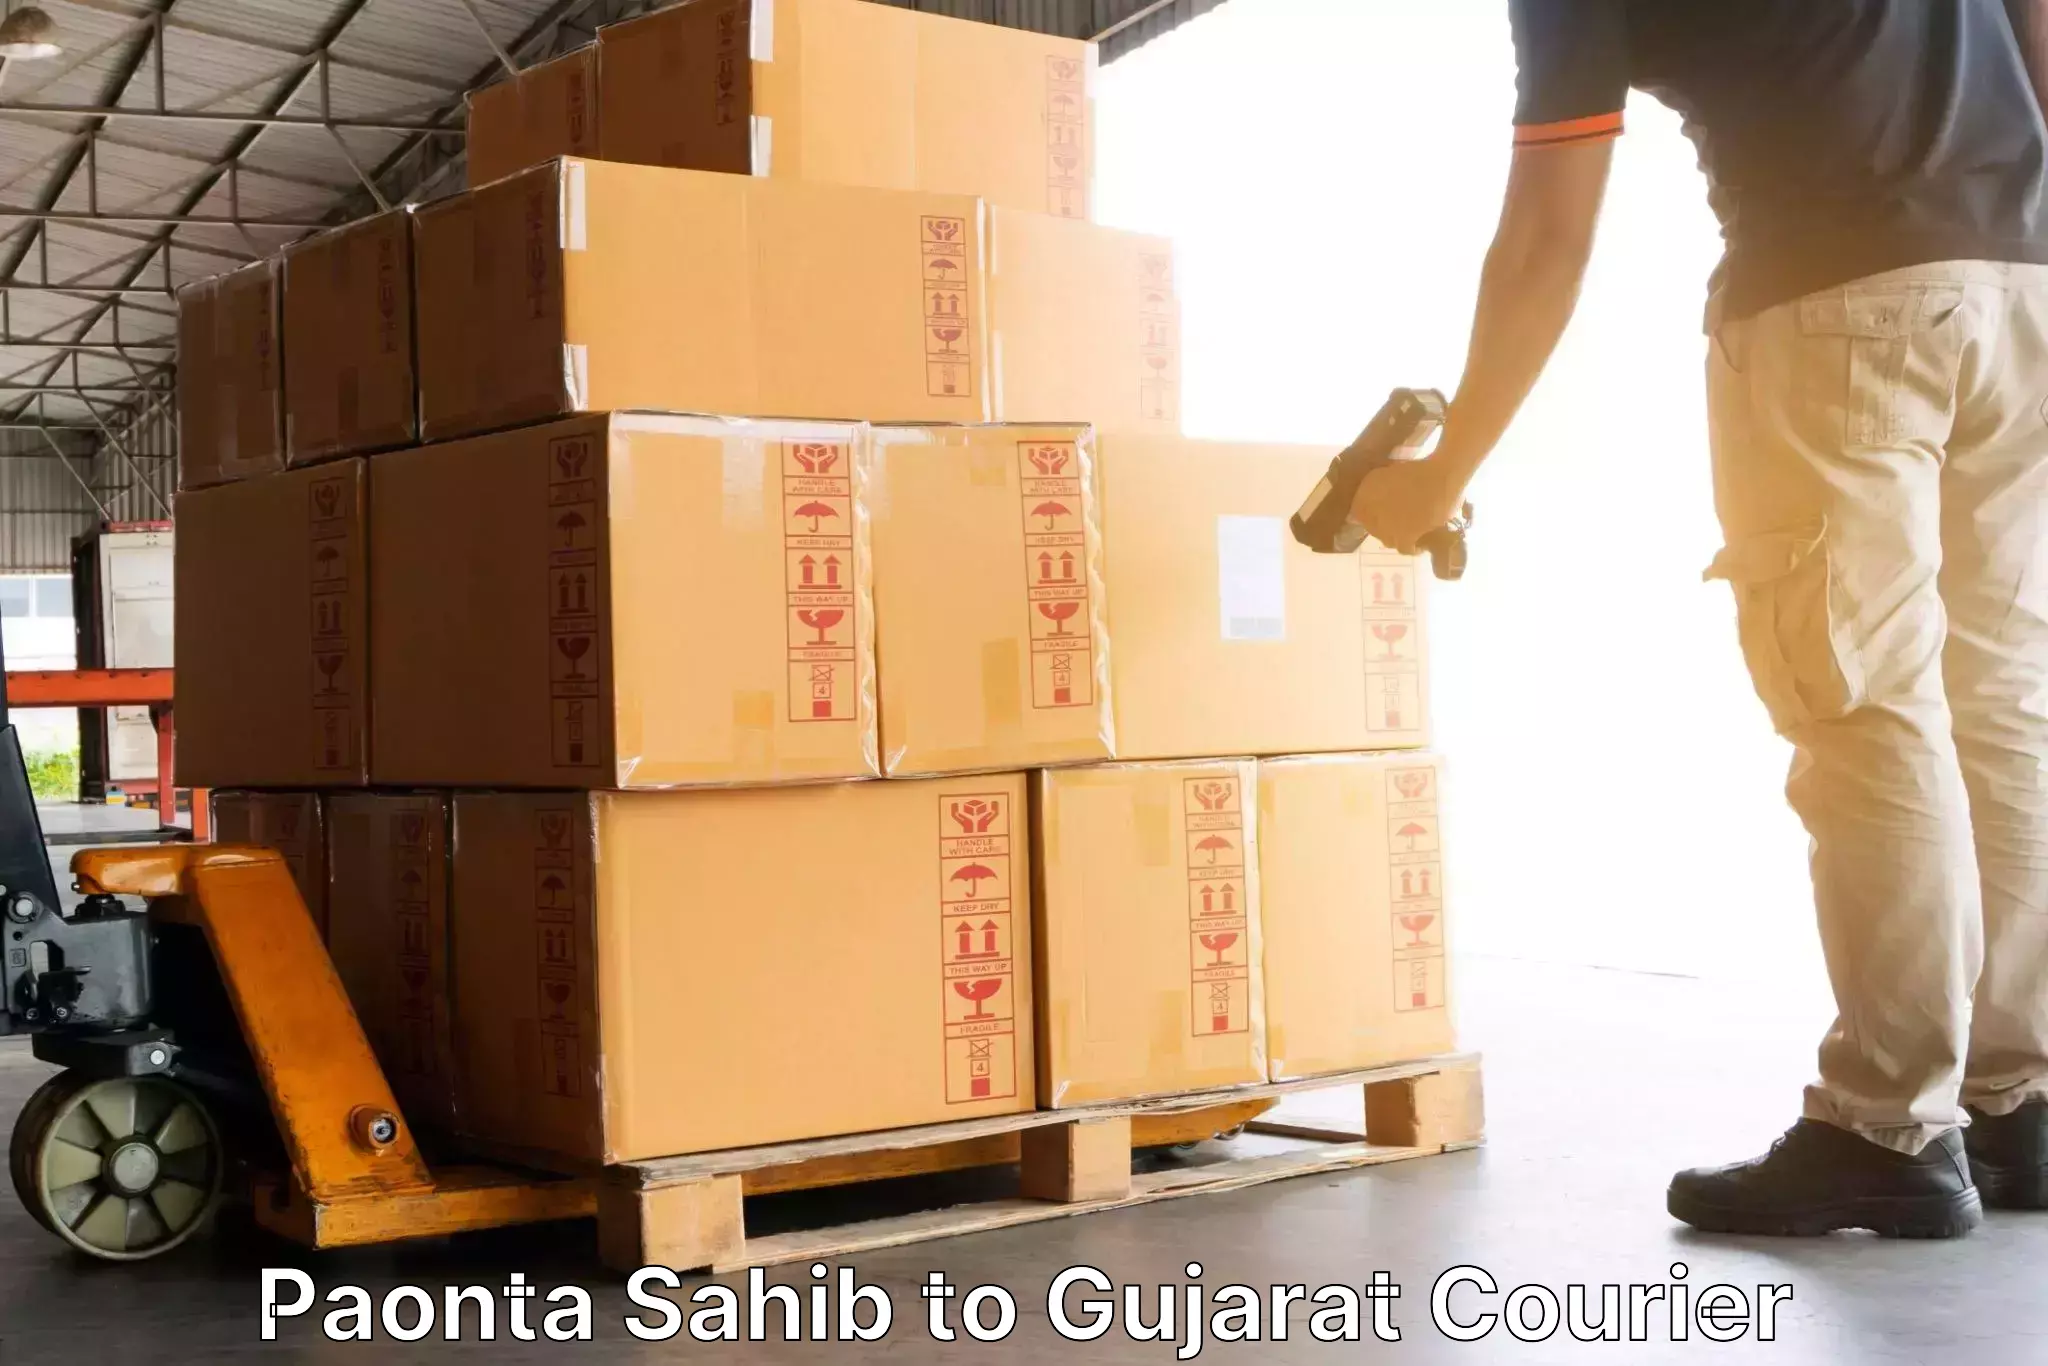 Courier services Paonta Sahib to Palanpur